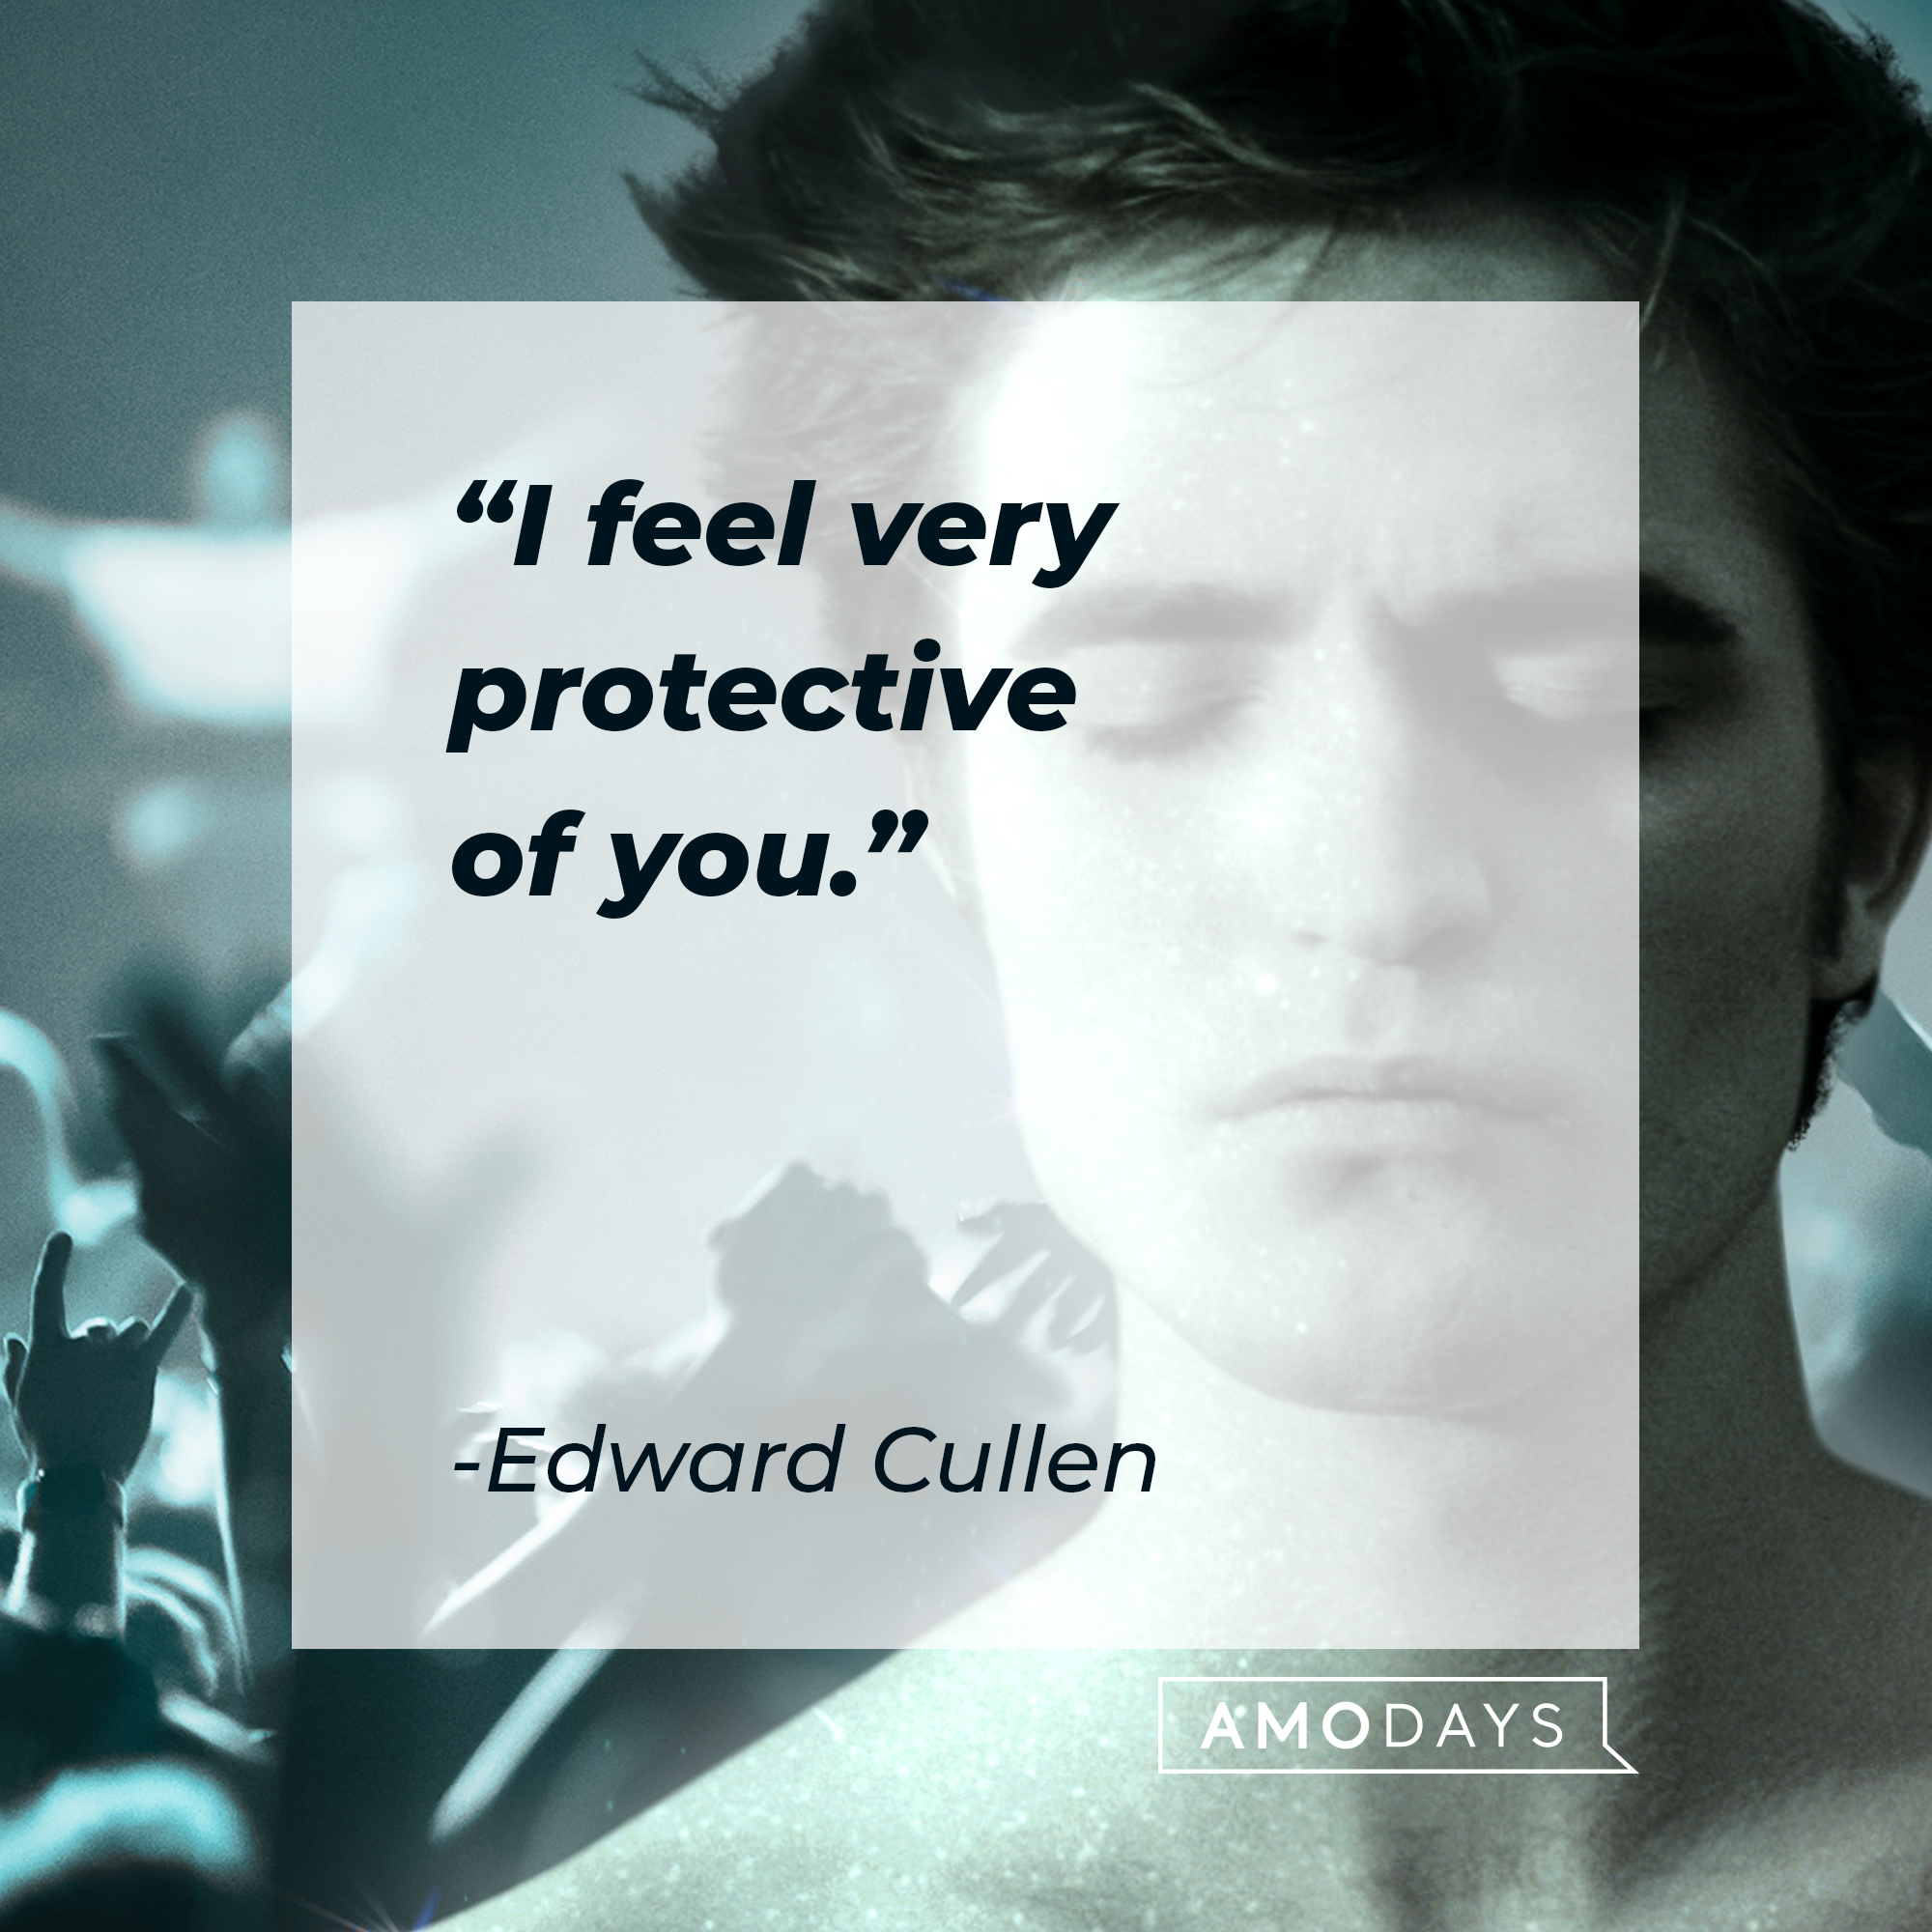 An image of Edward Cullen with his quote: "I feel very protective of you." | Source: Facebook.com/twilight